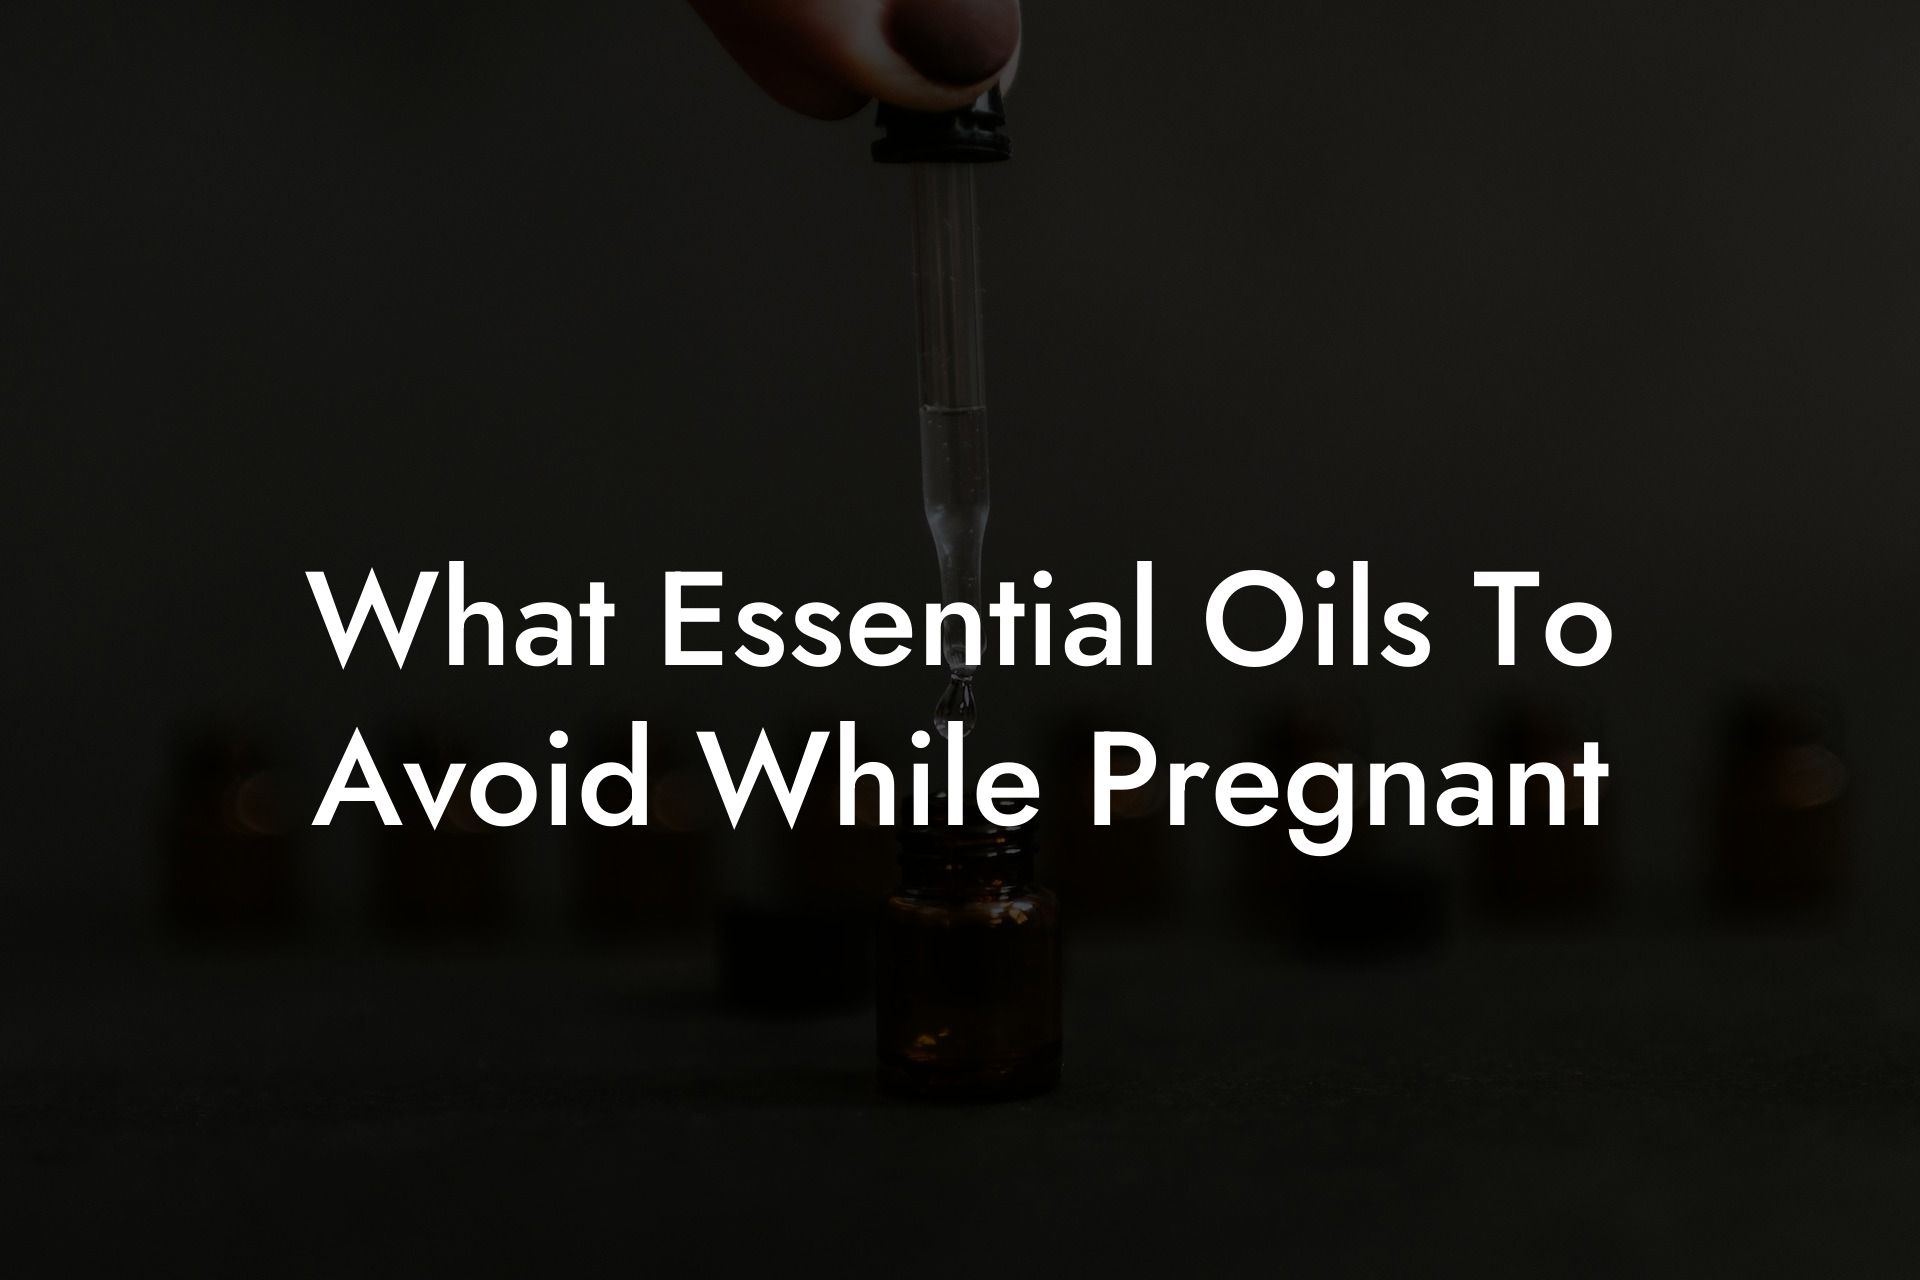 What Essential Oils To Avoid While Pregnant